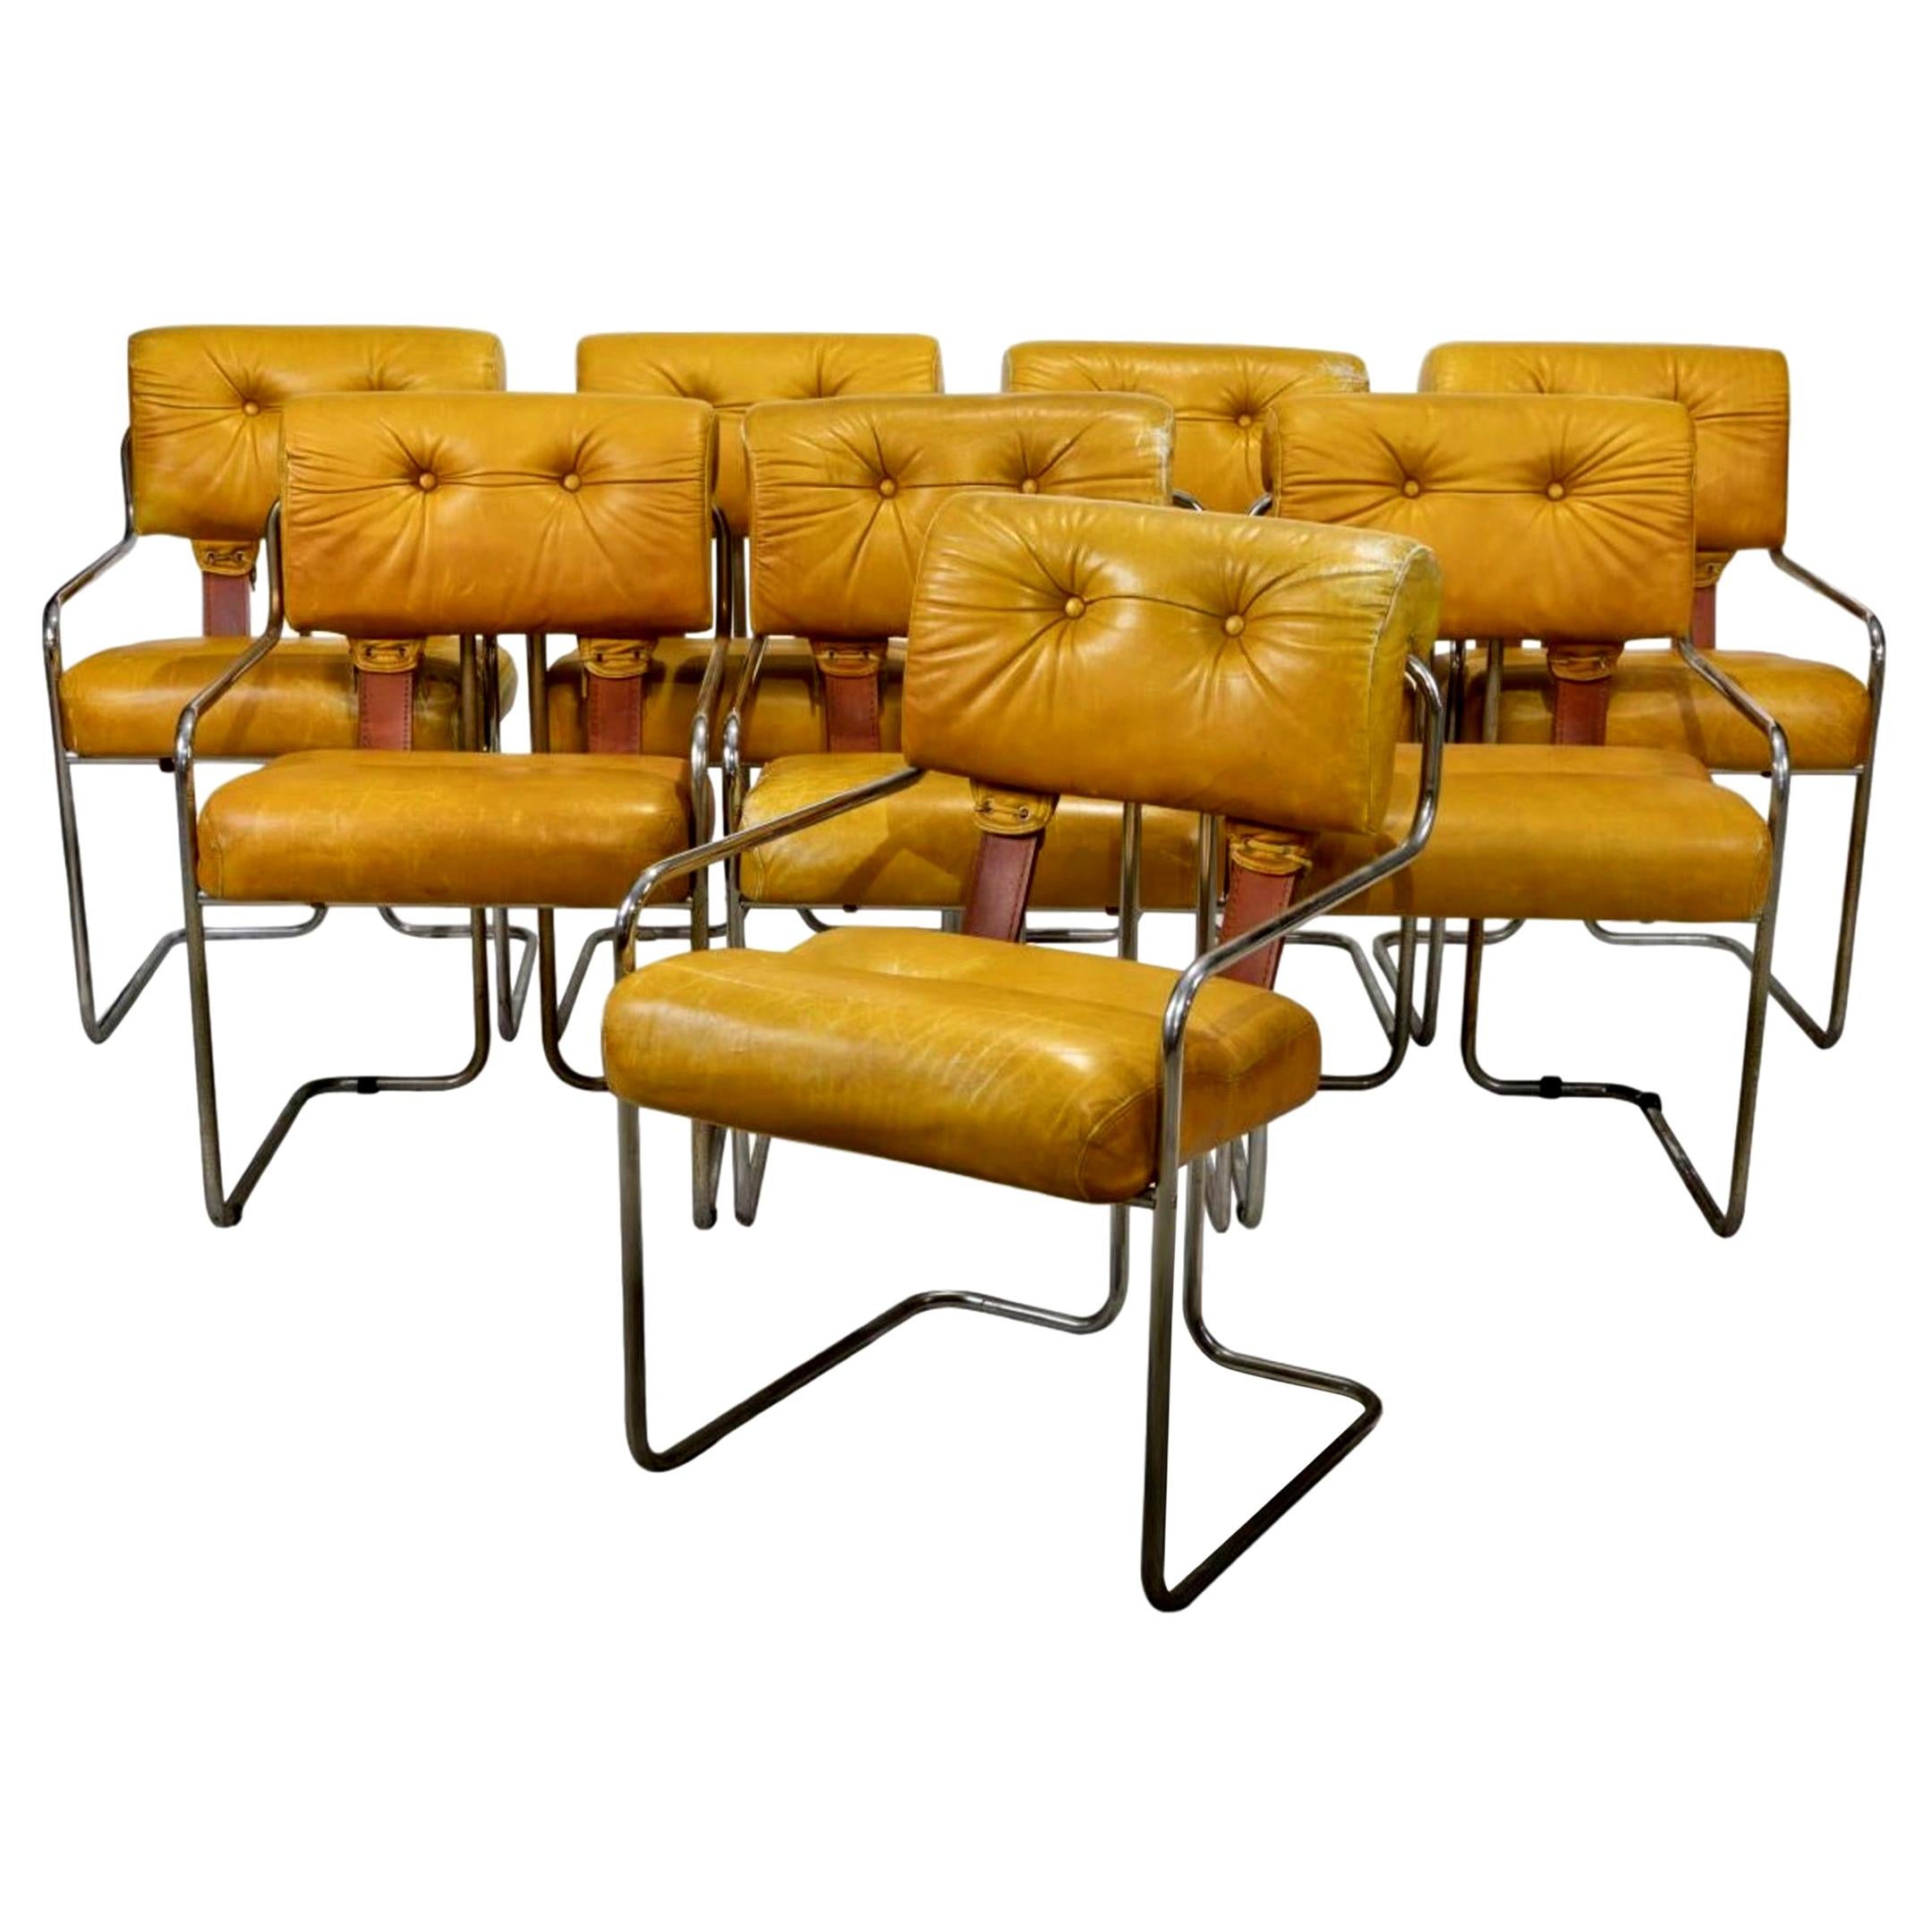 Set of 8 "Tucroma" Pace Chairs in Camel Leather by Guido Faleschini